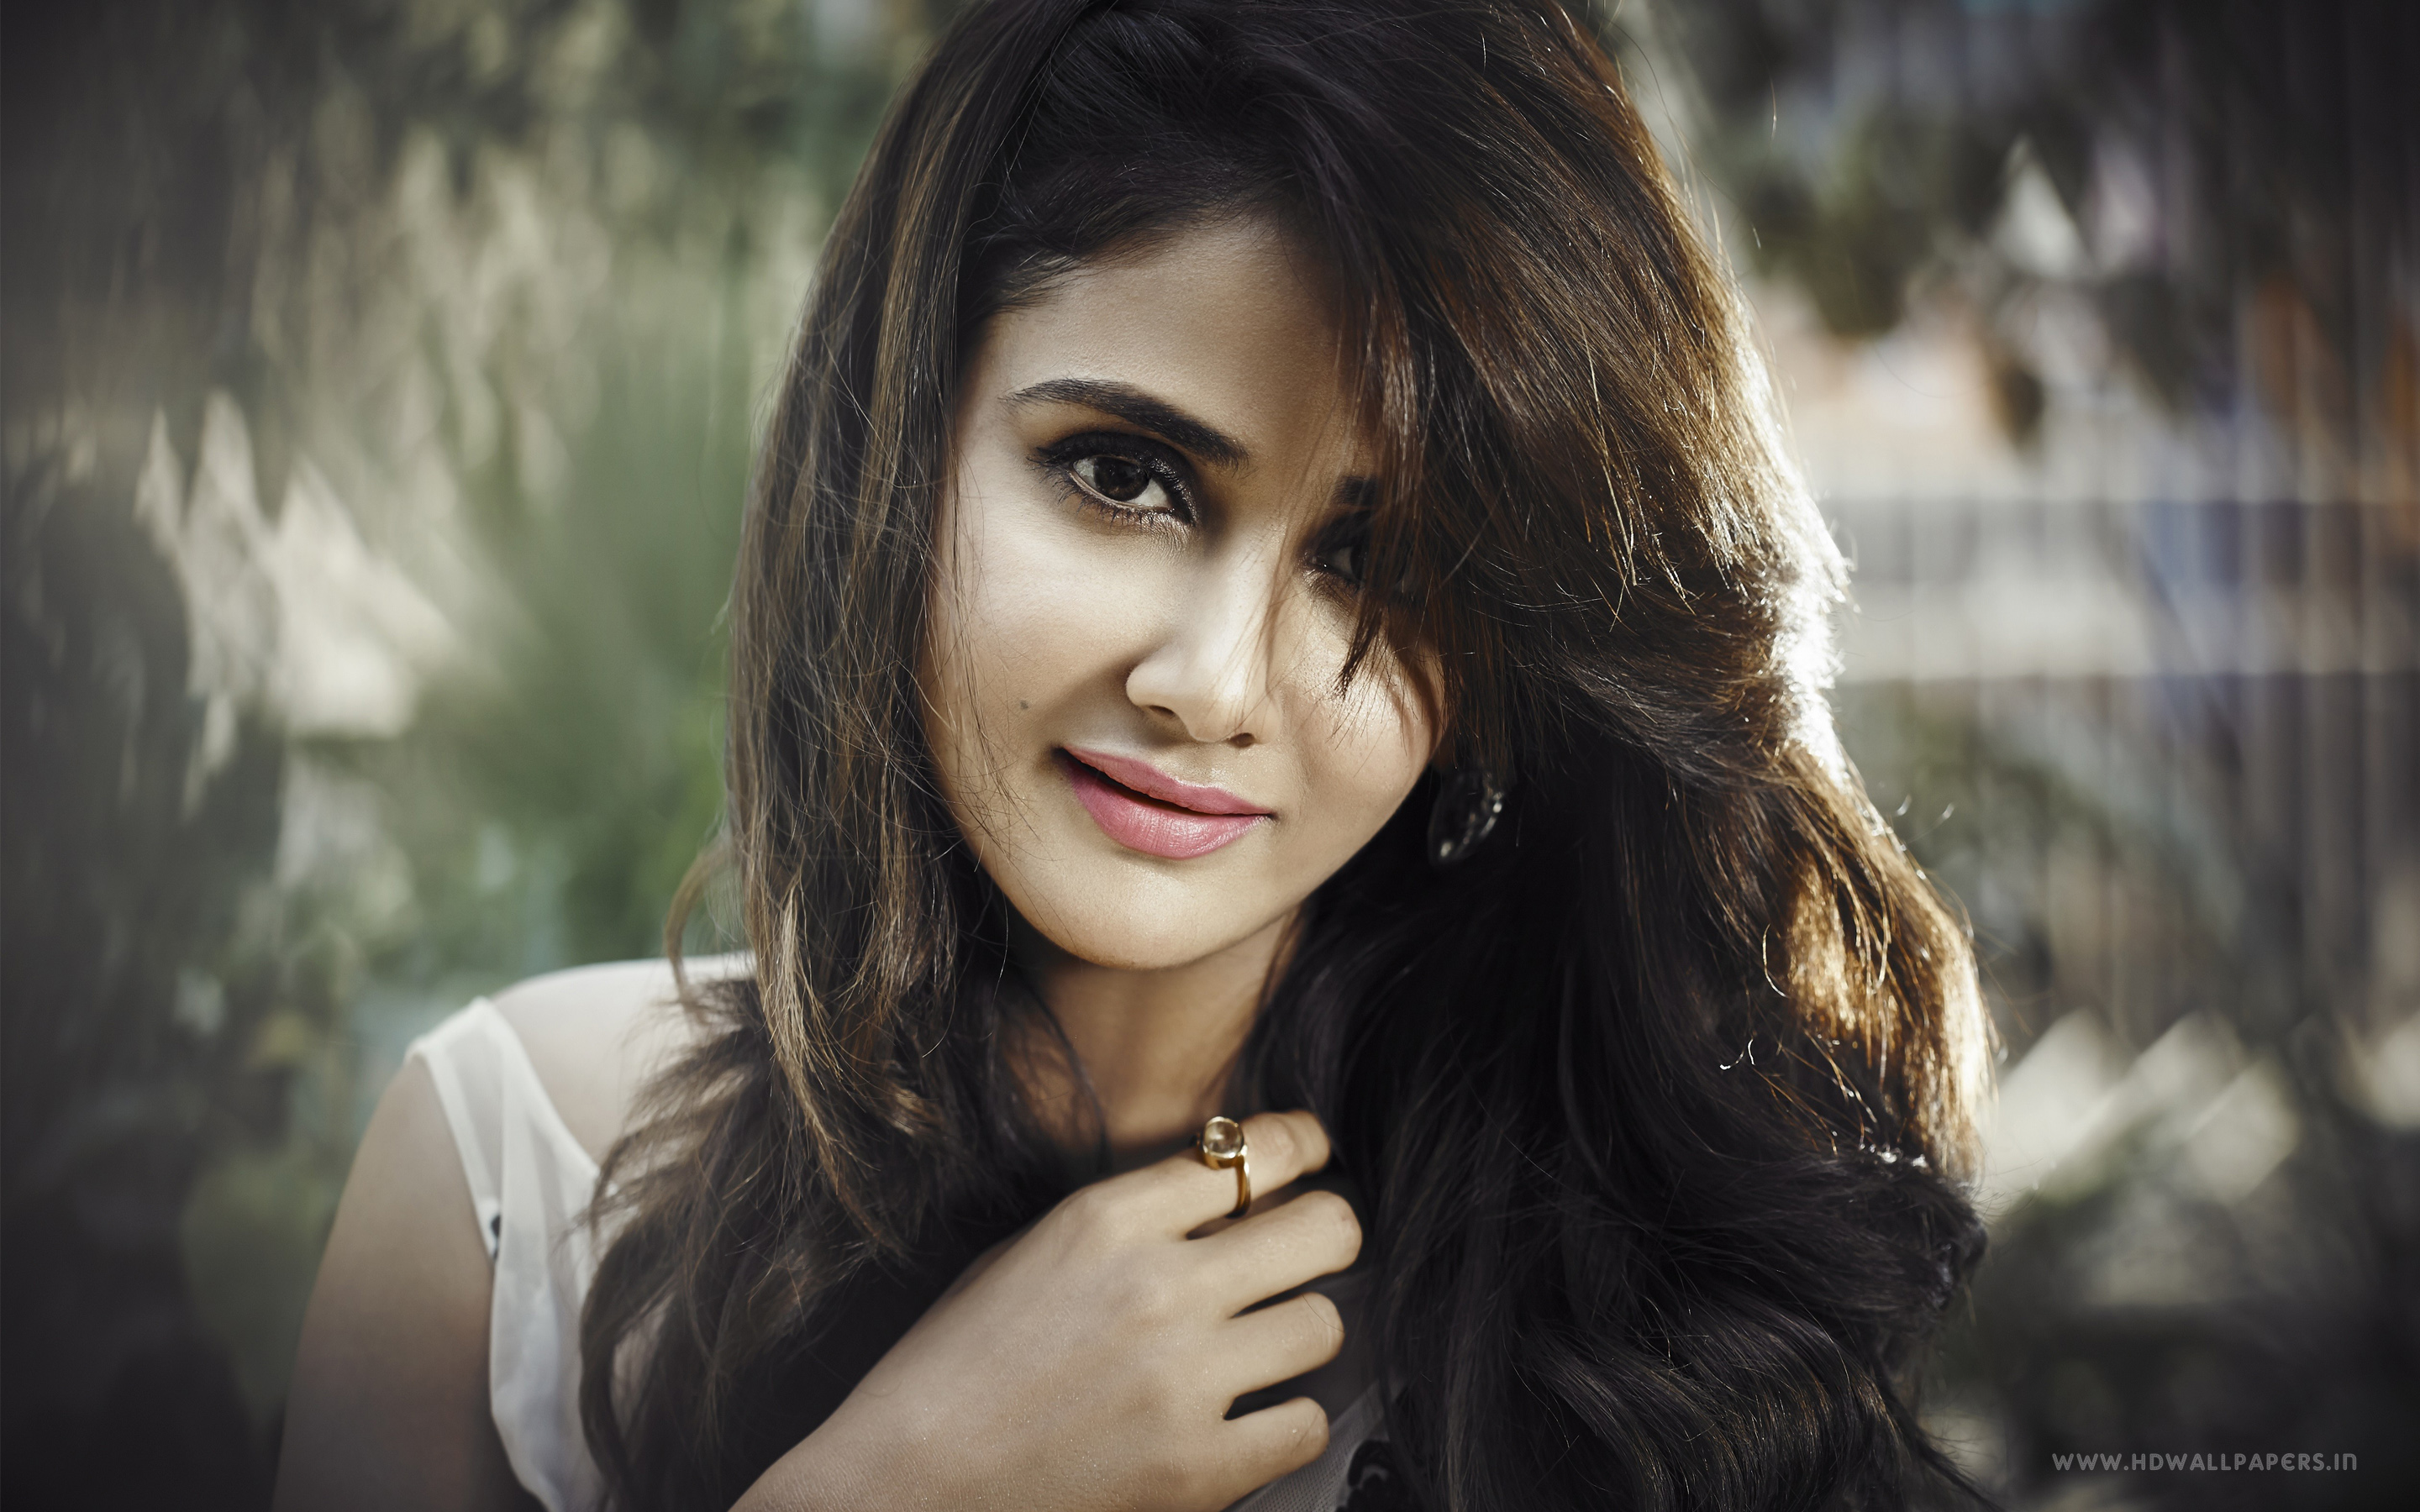 Nice Images Collection: Parul Yadav Desktop Wallpapers